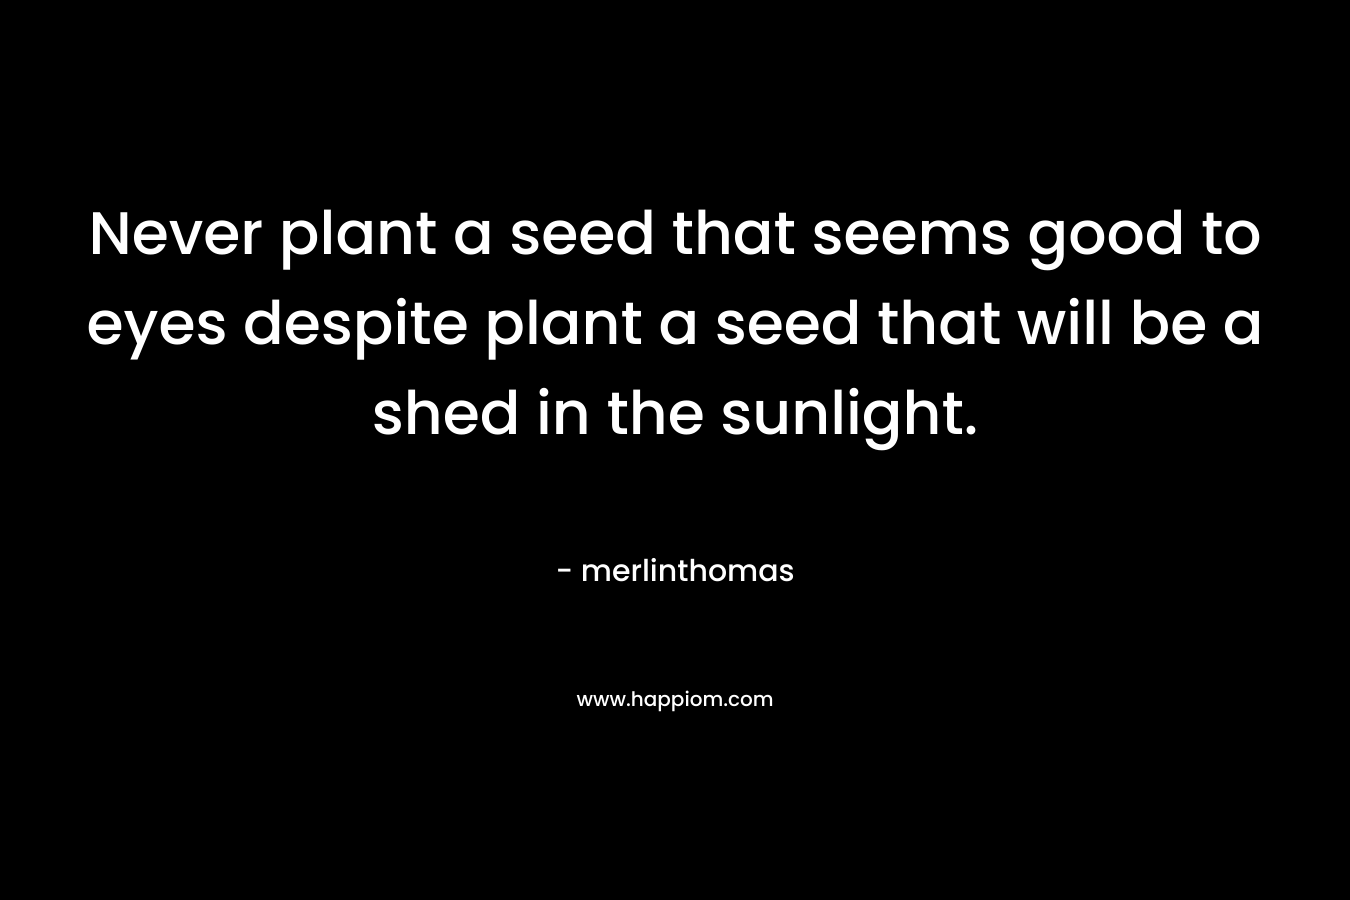 Never plant a seed that seems good to eyes despite plant a seed that will be a shed in the sunlight.